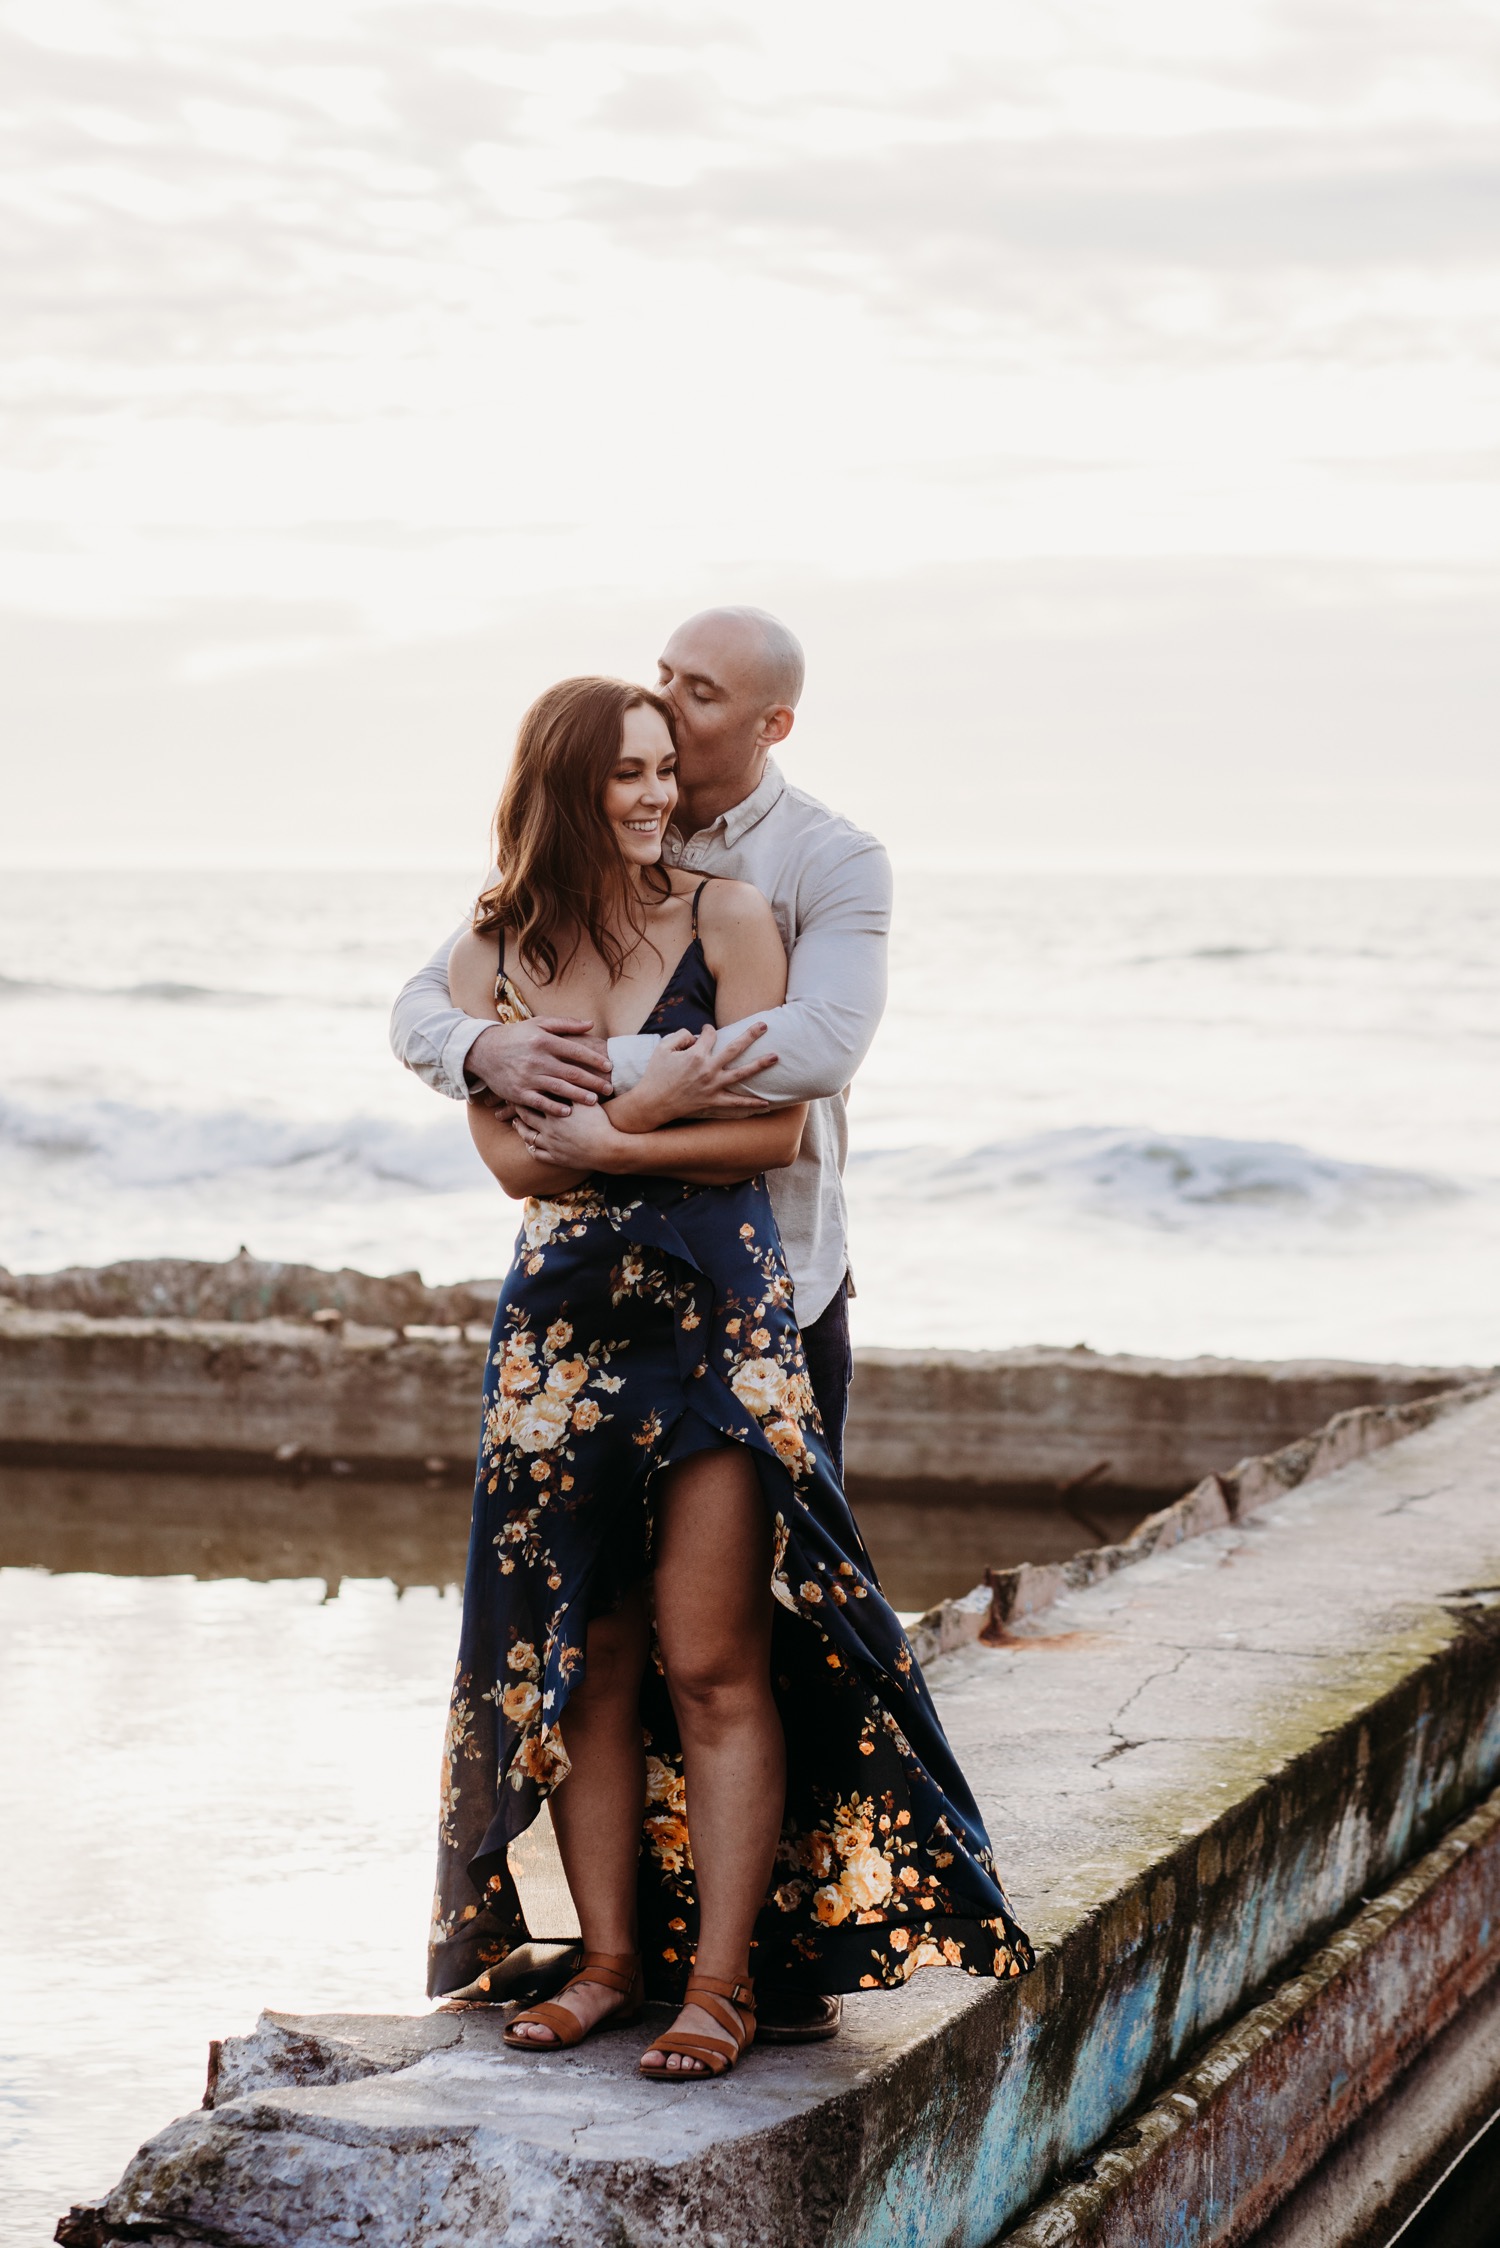 Man hugs his fiance from behind while standing on a Sutro Bath ruin and the Pacific Ocean in the background during their Sutro Baths engagement photoshoot.